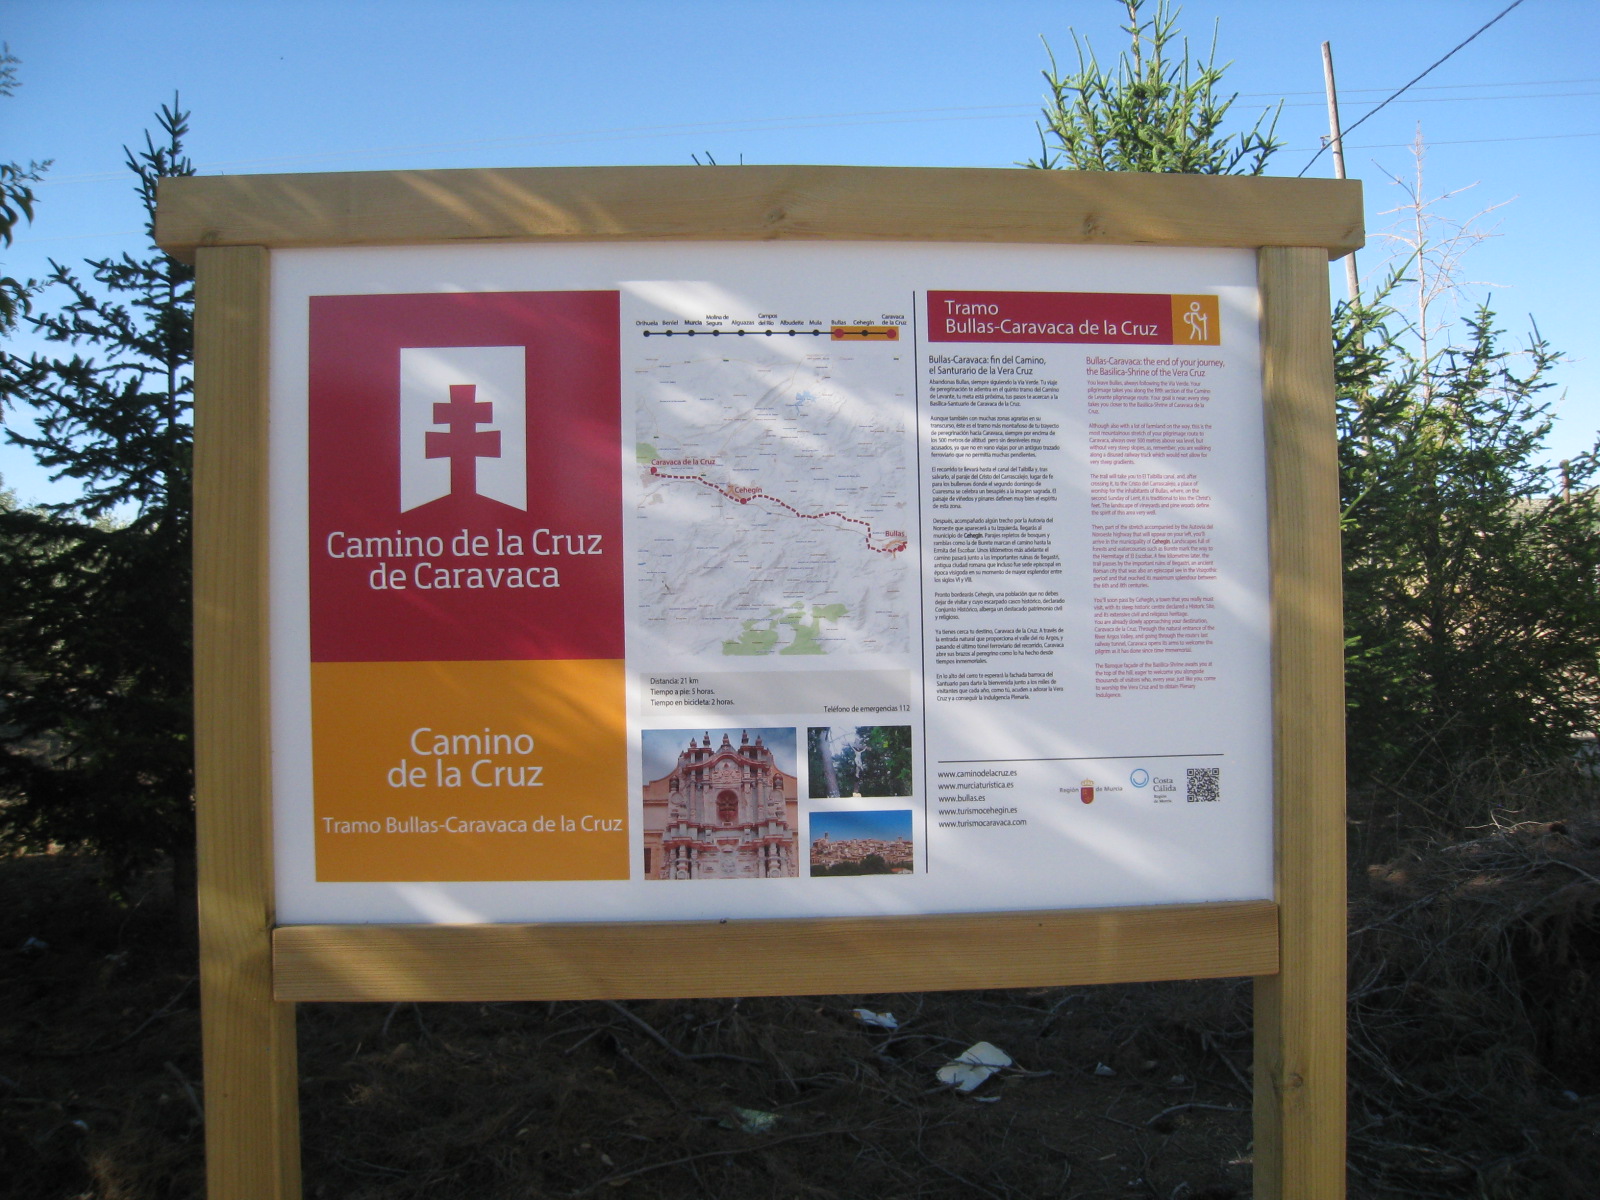 Section or stage information board on the Camino de Levante